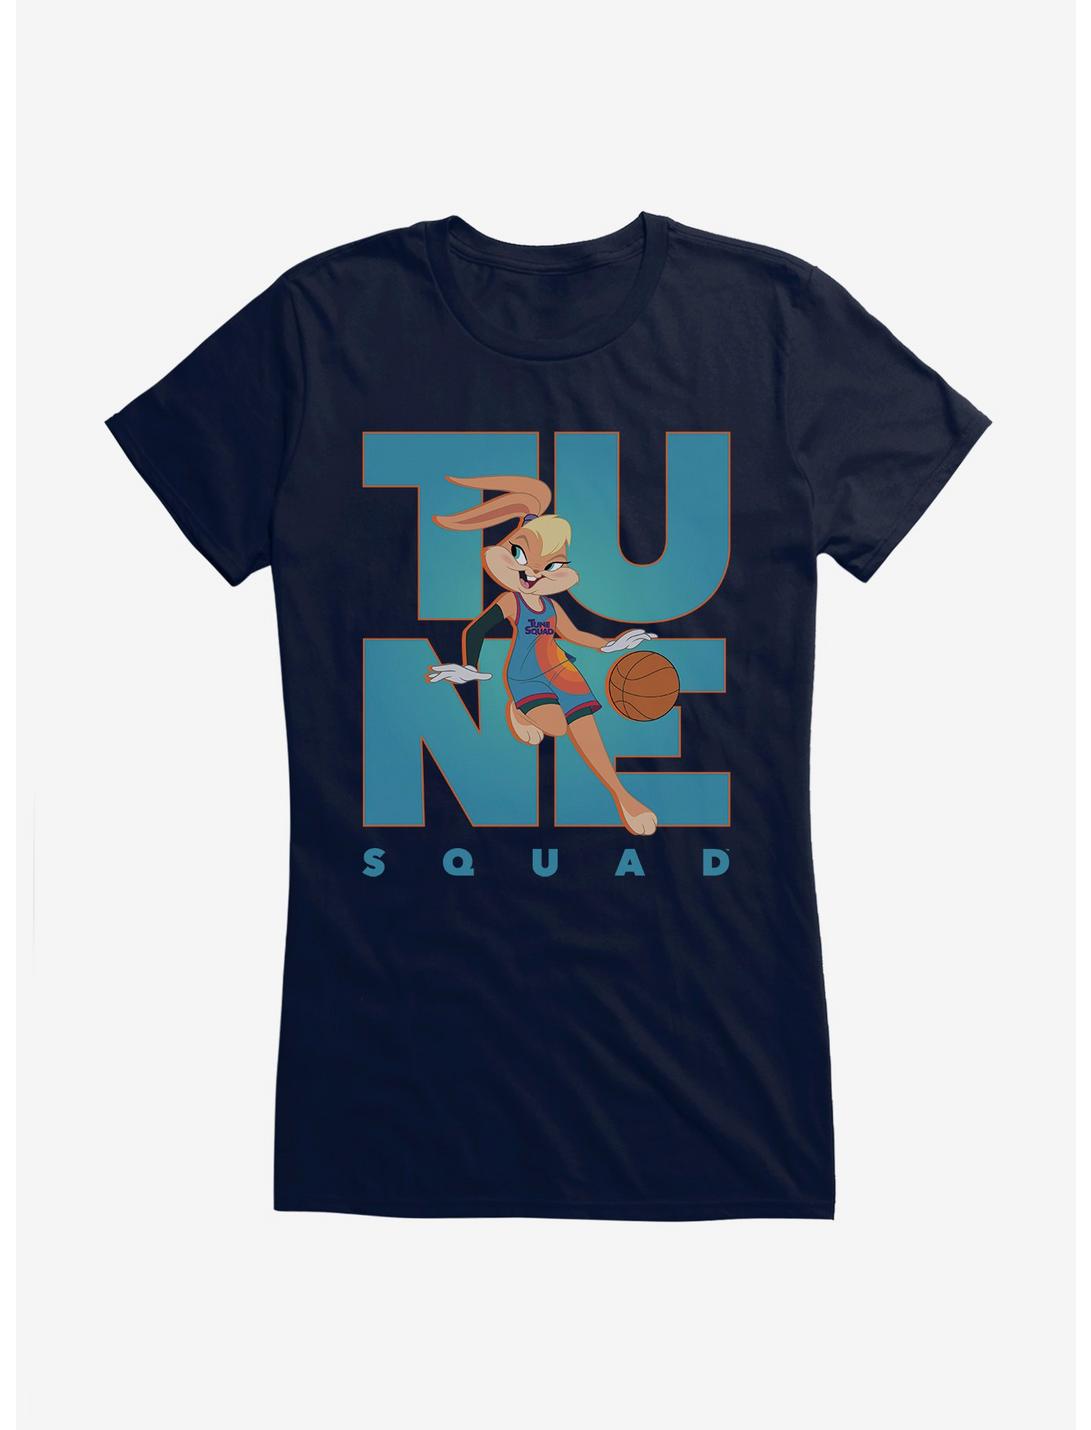 Space Jam: A New Legacy Dribble Lola Bunny Tune Squad Girls T-Shirt, NAVY, hi-res